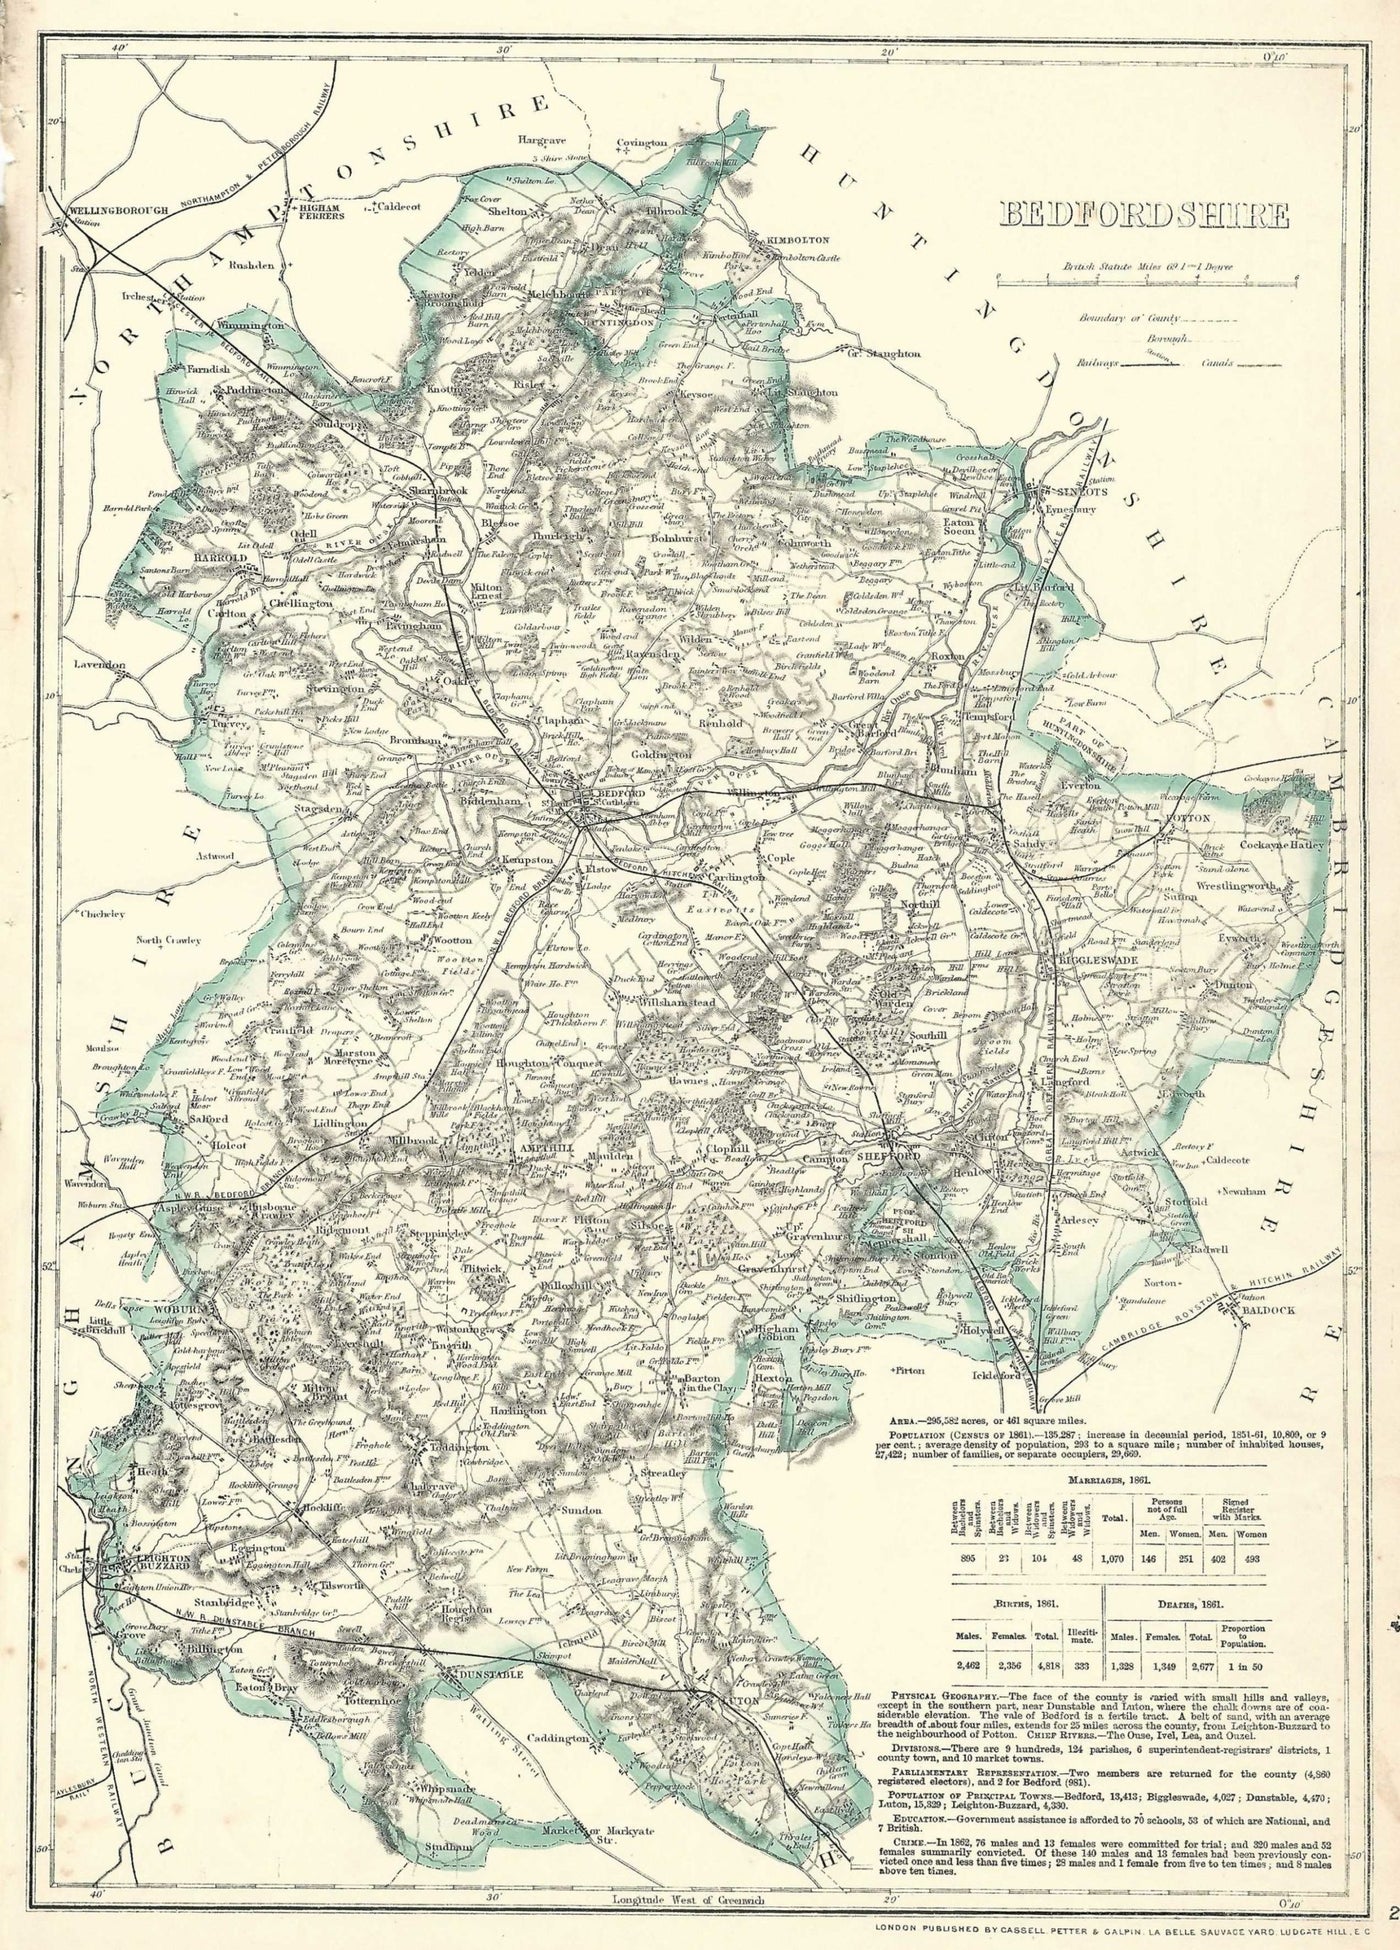 Bedfordshire antique map from Cassell's County Atlas 1864